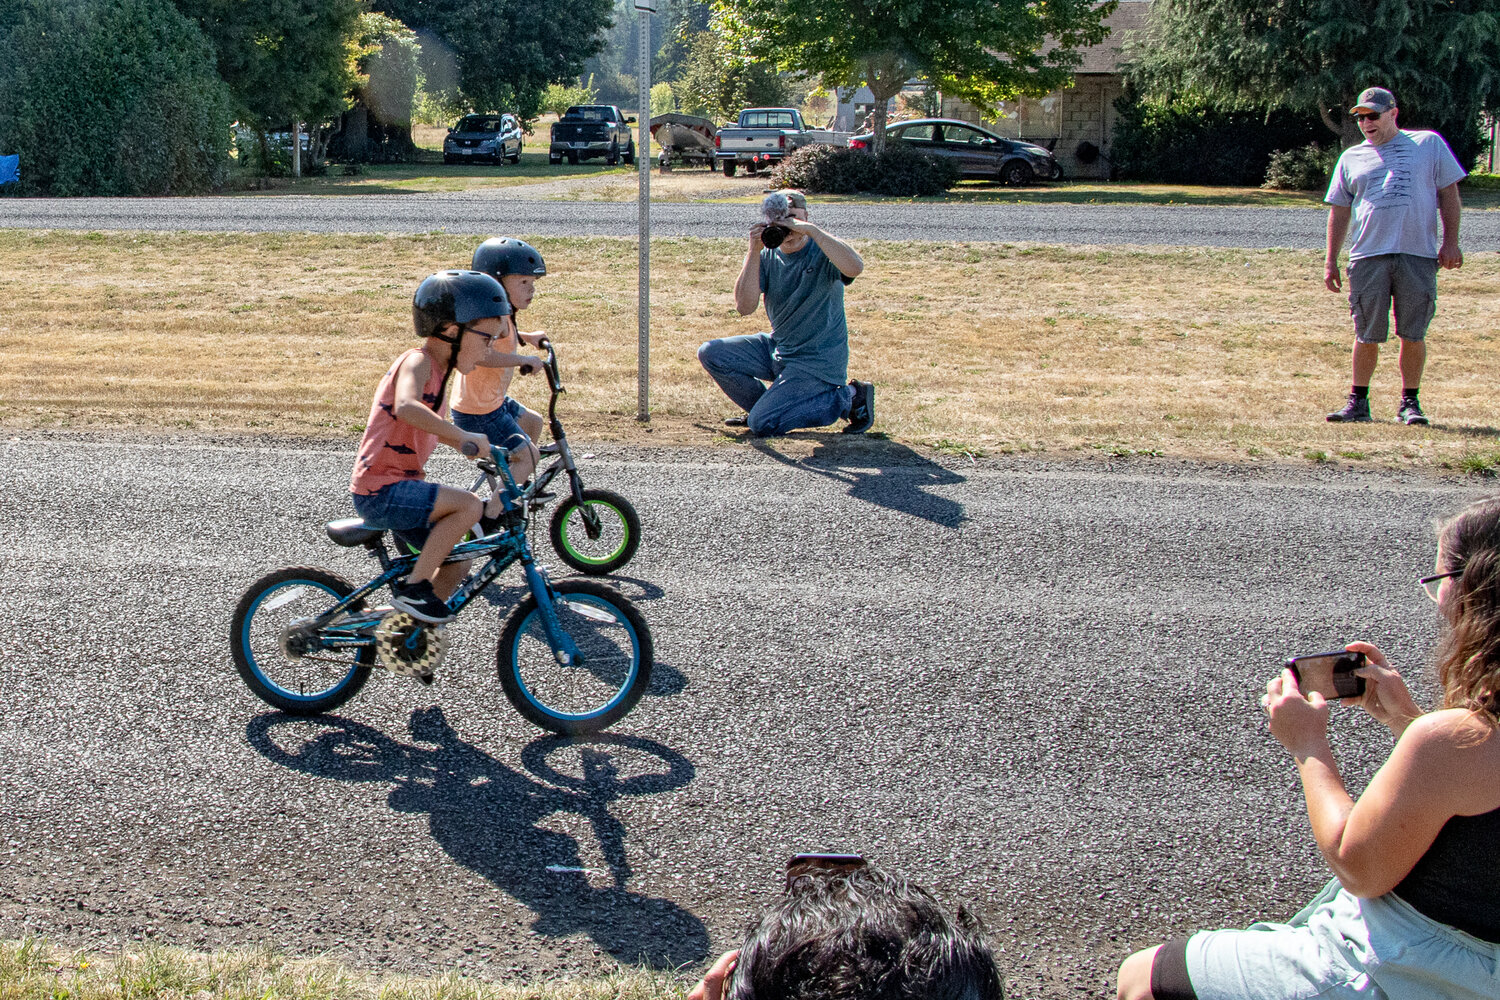 It came down to a photo-finish tie between brothers Leon, on the green-wheeled bike, and Talon Huang, on the blue-wheeled bike, of Mossyrock during the children's bike races at Mossyrock's Mexican Independence Day celebration on Saturday, Sept. 16.